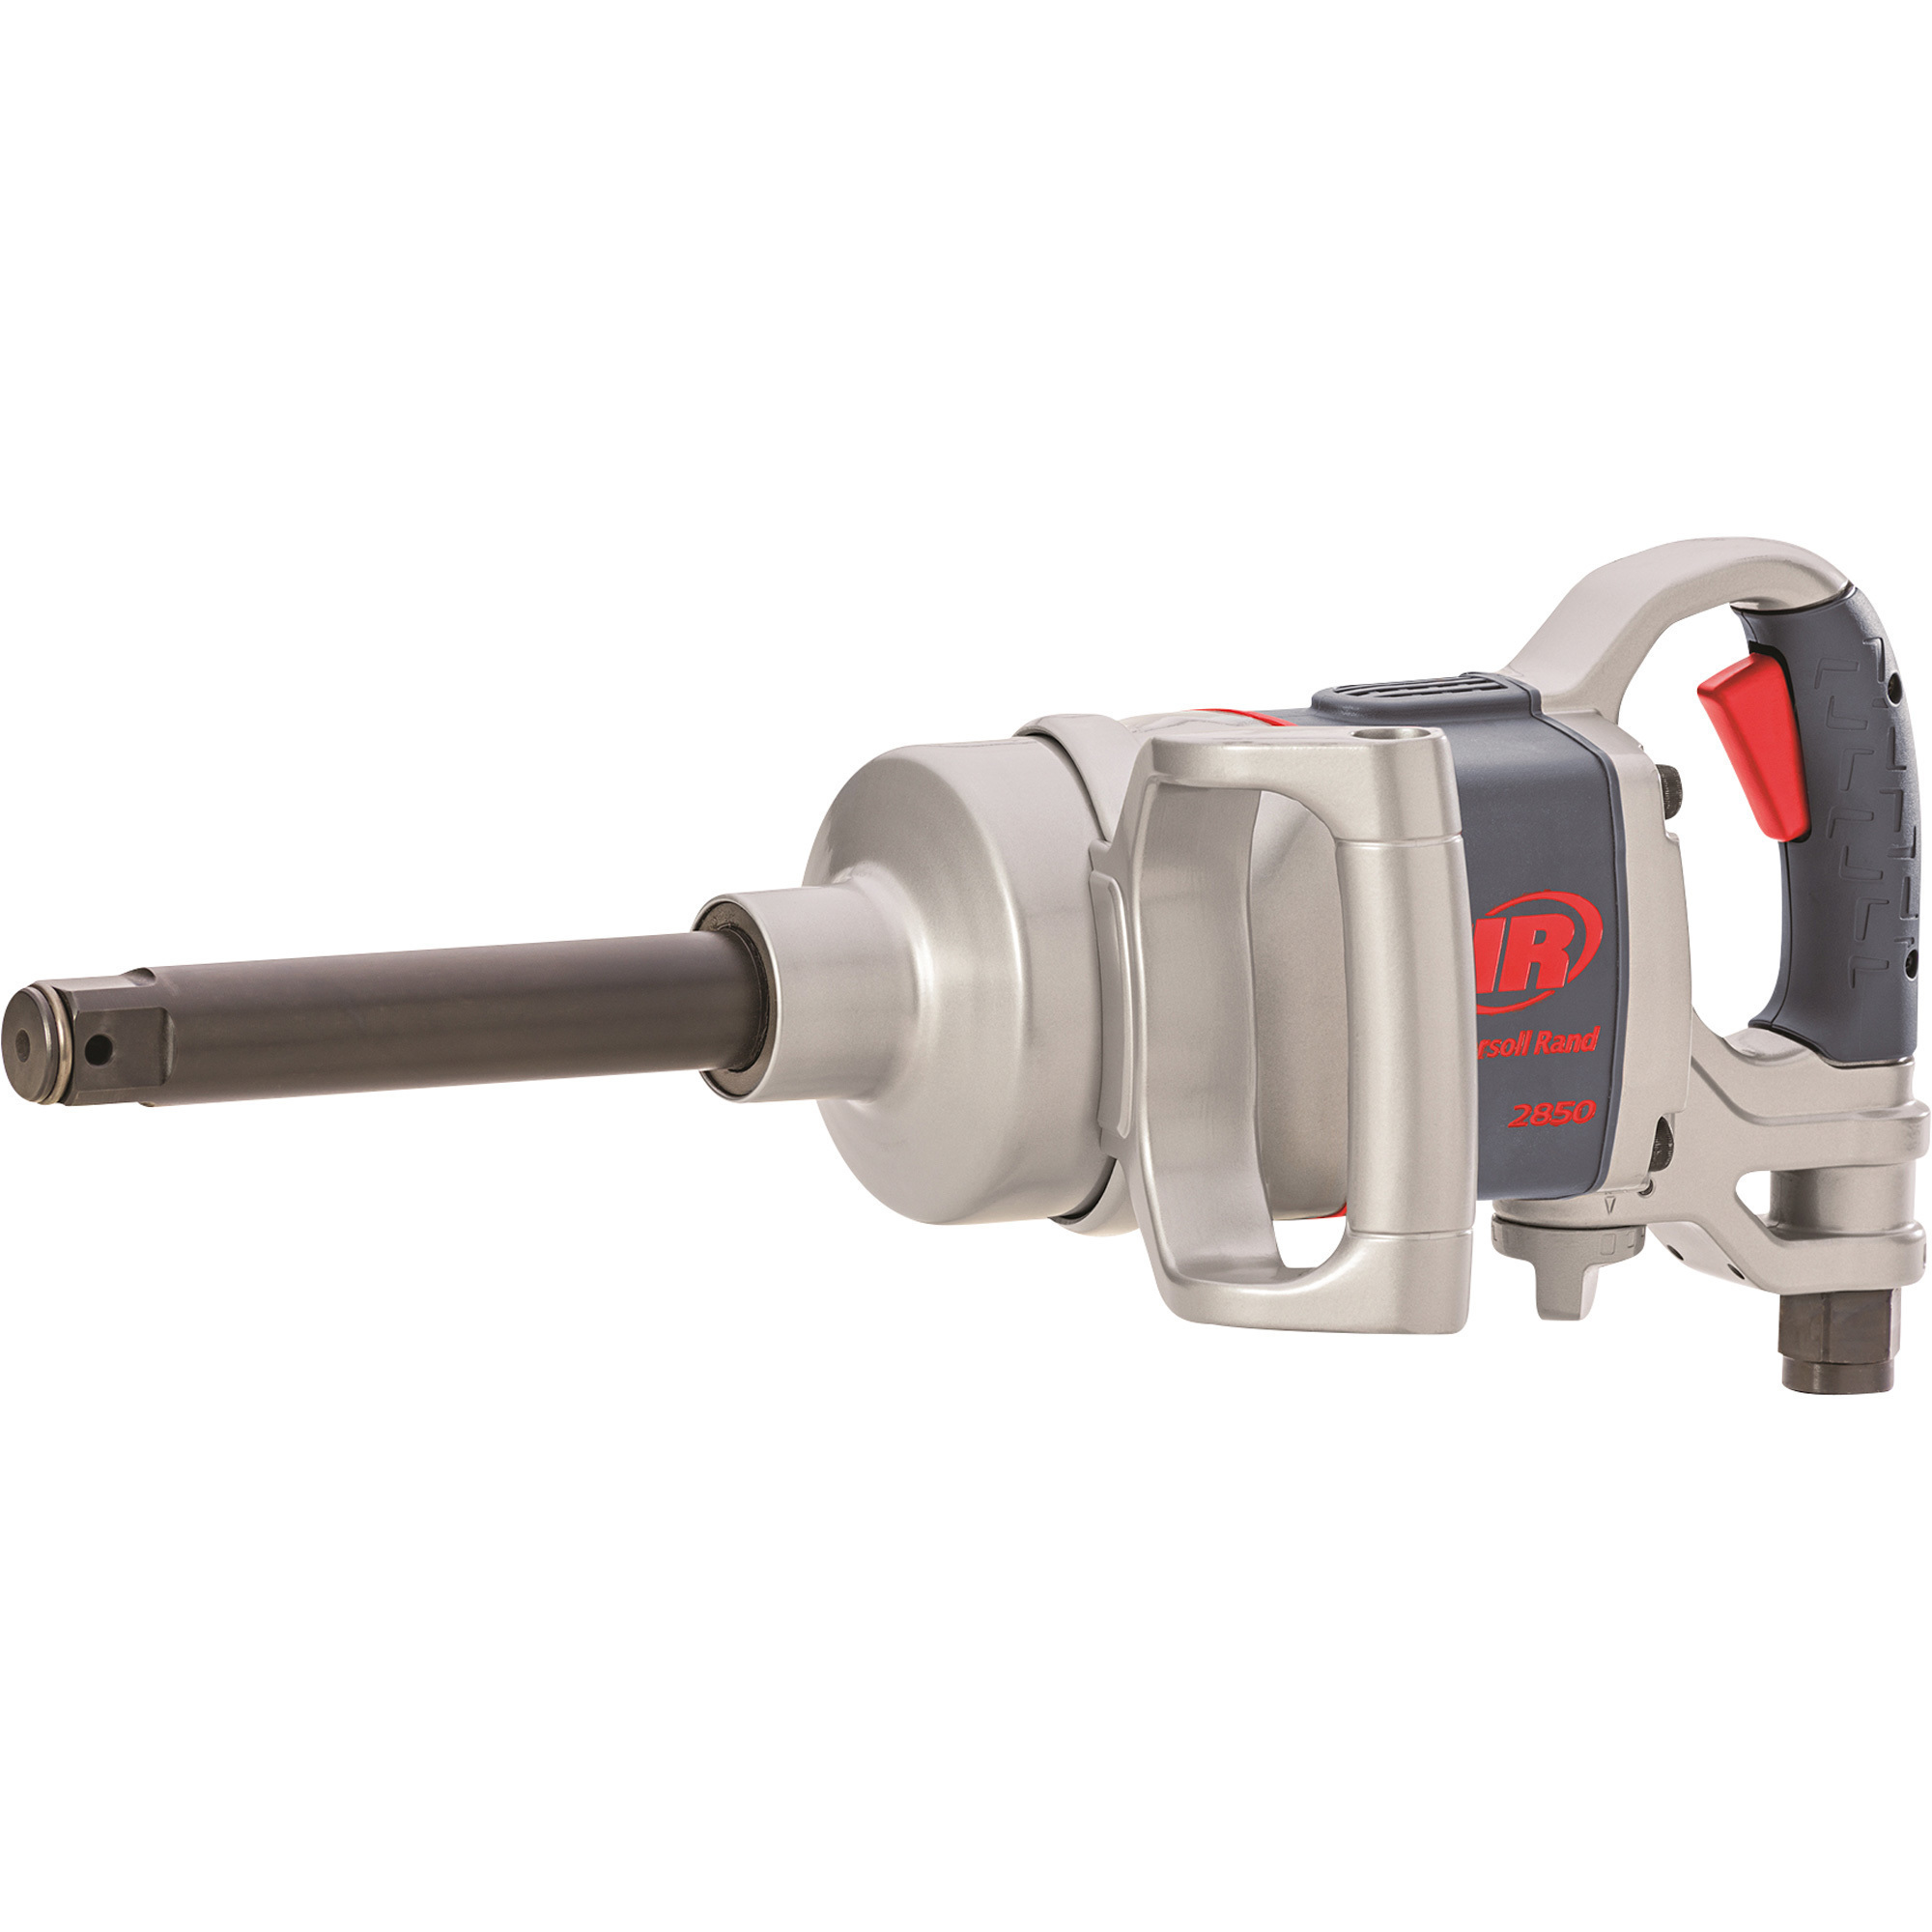 Ingersoll Rand Air Impact Wrench, 1Inch Drive, 2100 Ft./Lbs. Torque, D-Handle, 6Inch Anvil, Model 2850MAX-6